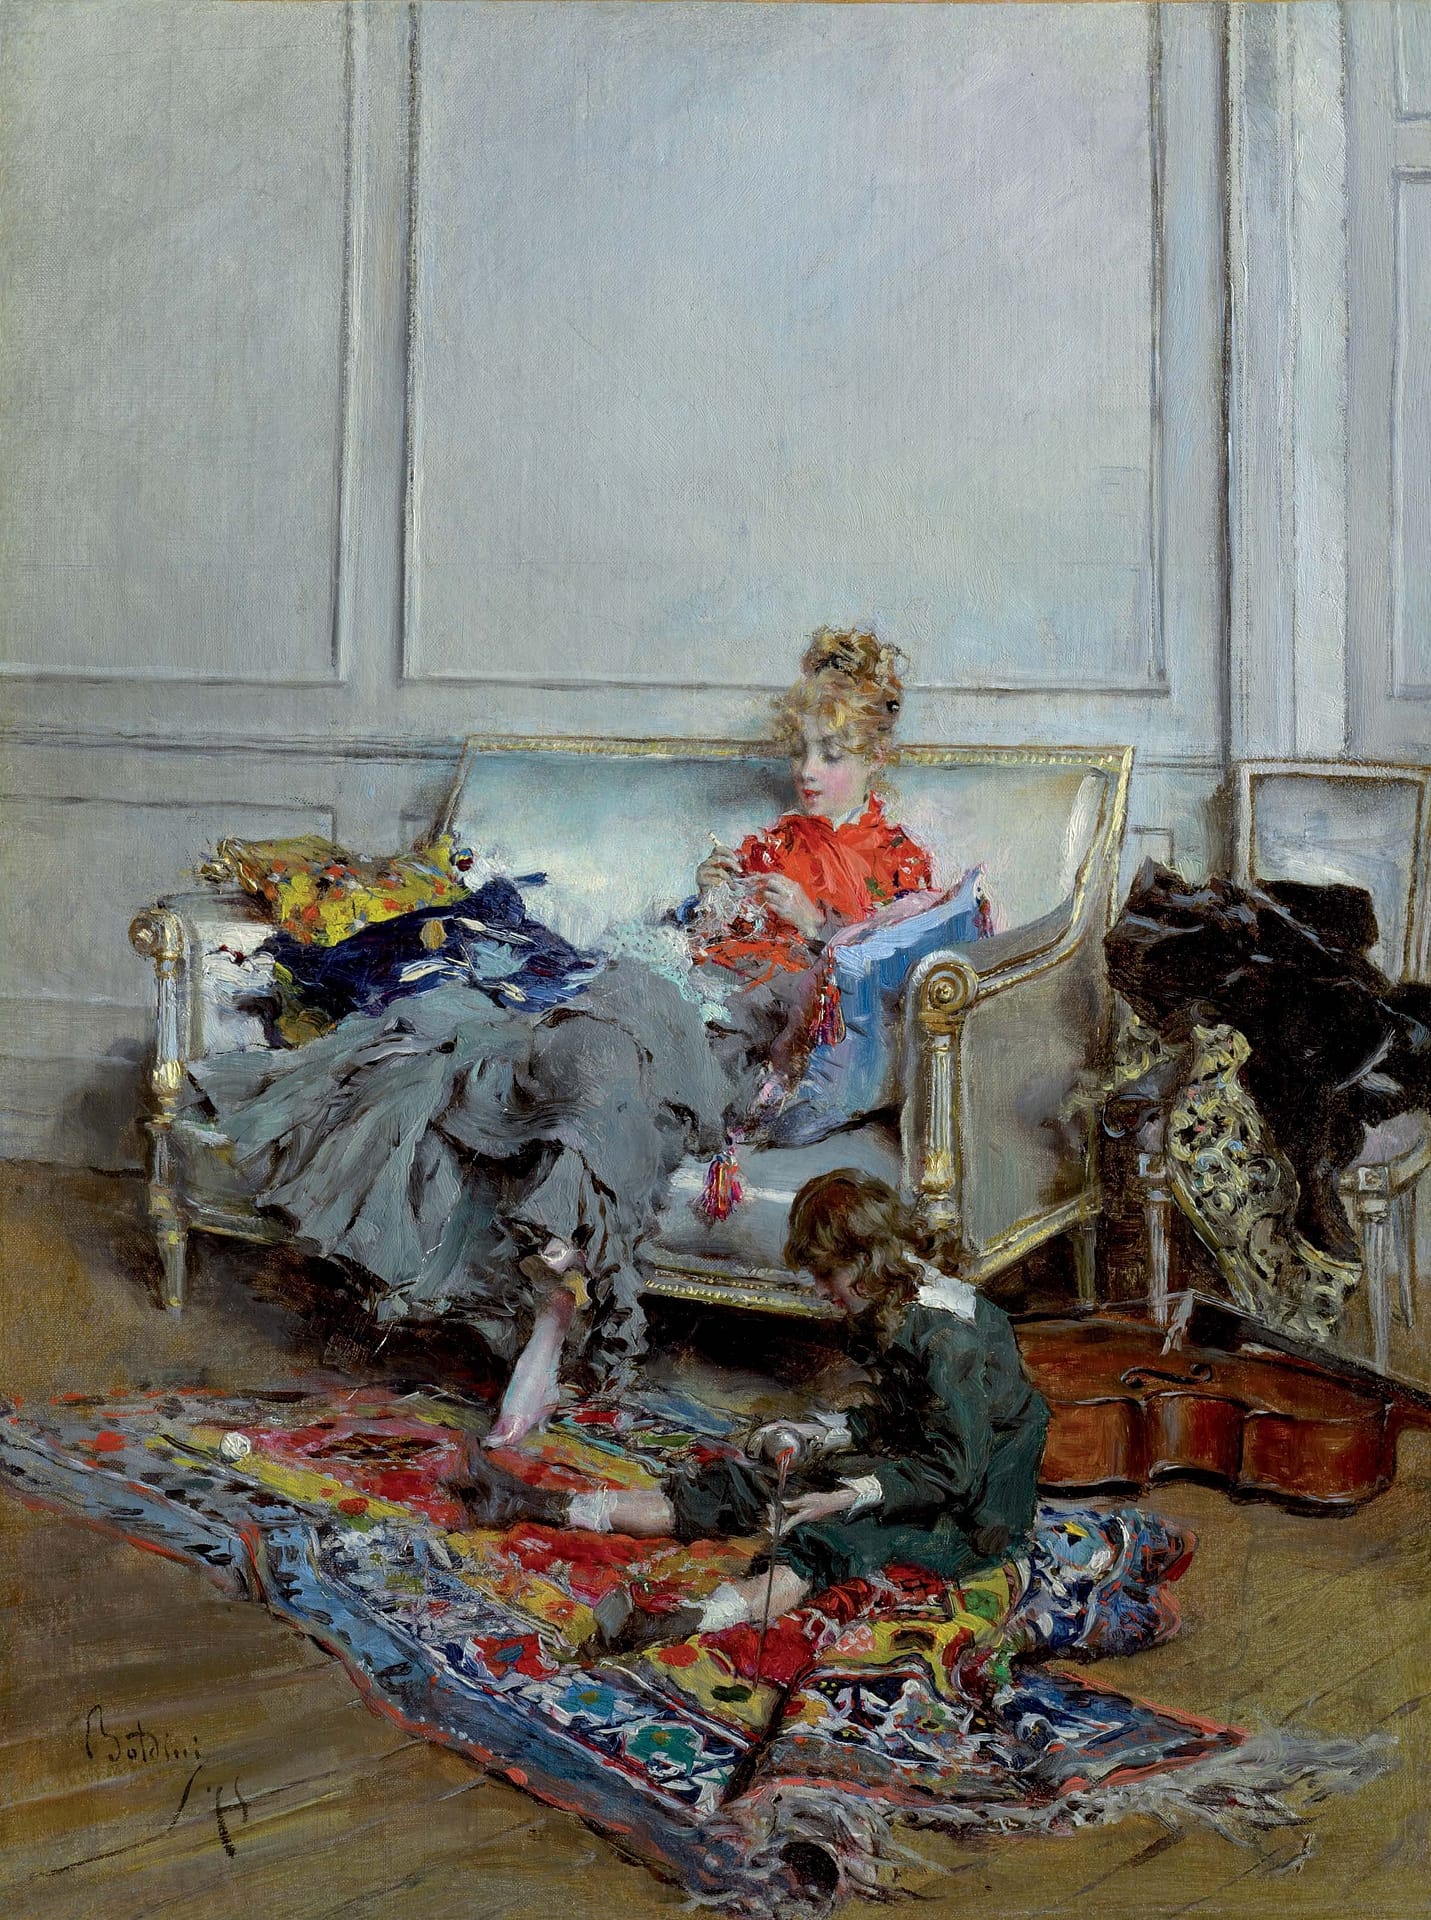 Peaceful Days, 1875, by Giovanni Boldini Oil on canvas, 14 1/4 x 10 3/4 in. (36.2 x 27.4 cm) Sterling and Francine Clark Art Institute, Williamstown, Massachusetts (photo by Michael Agee)